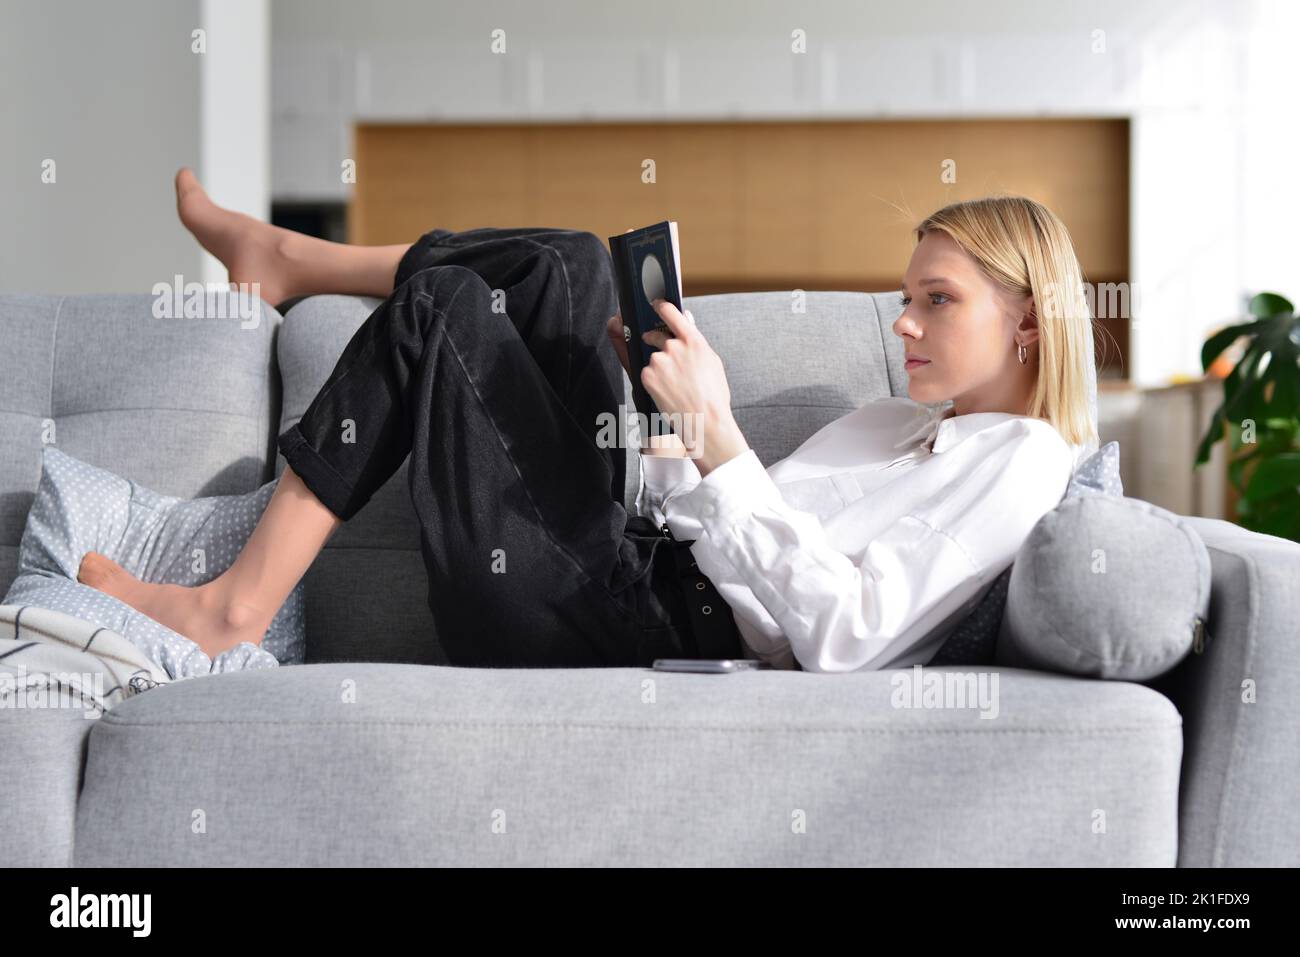 Woman lies on sofa and reads book. Stock Photo